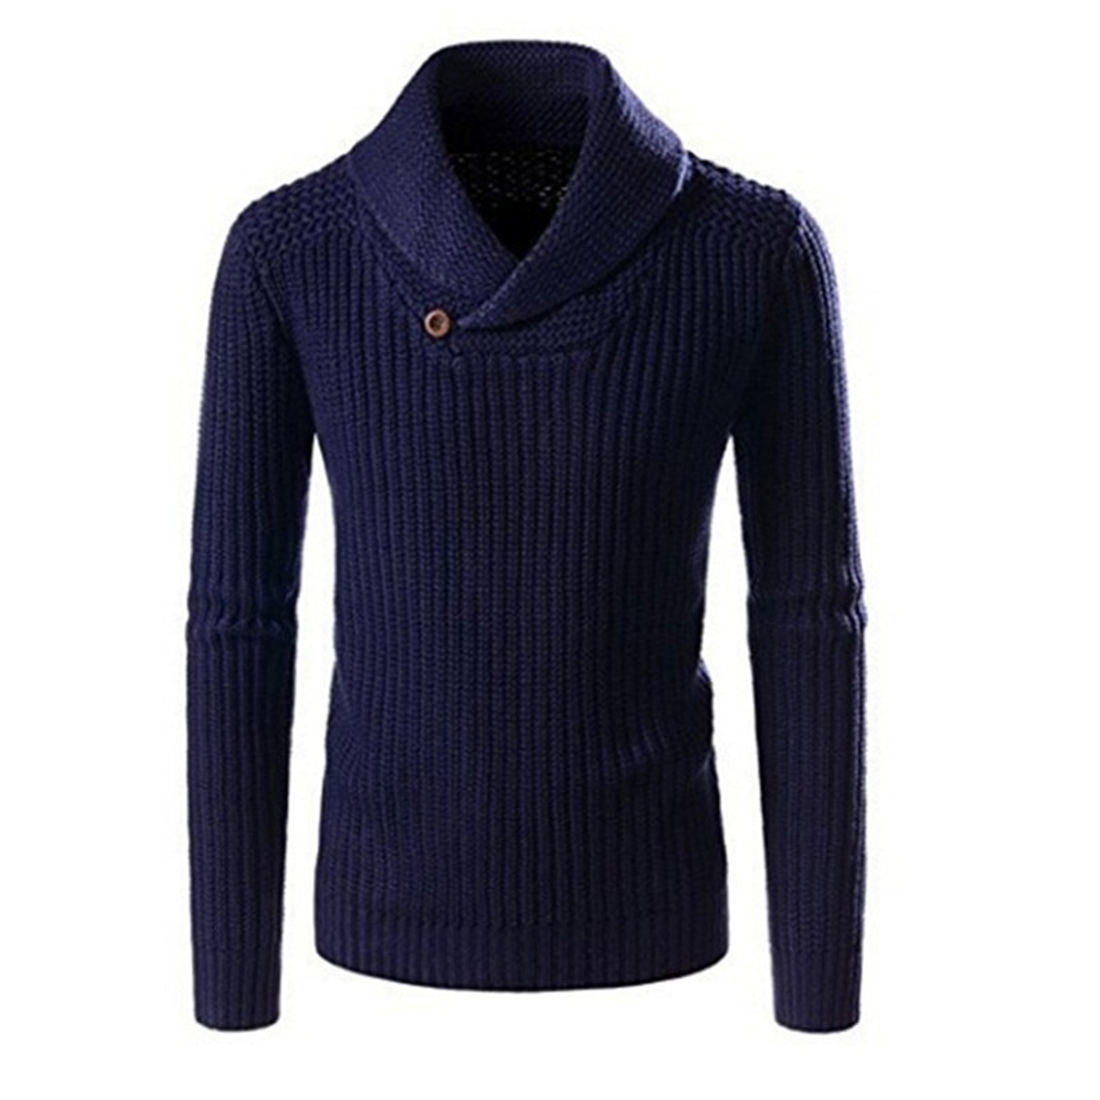 Men's Winter Casual Warm Knitted Sweater